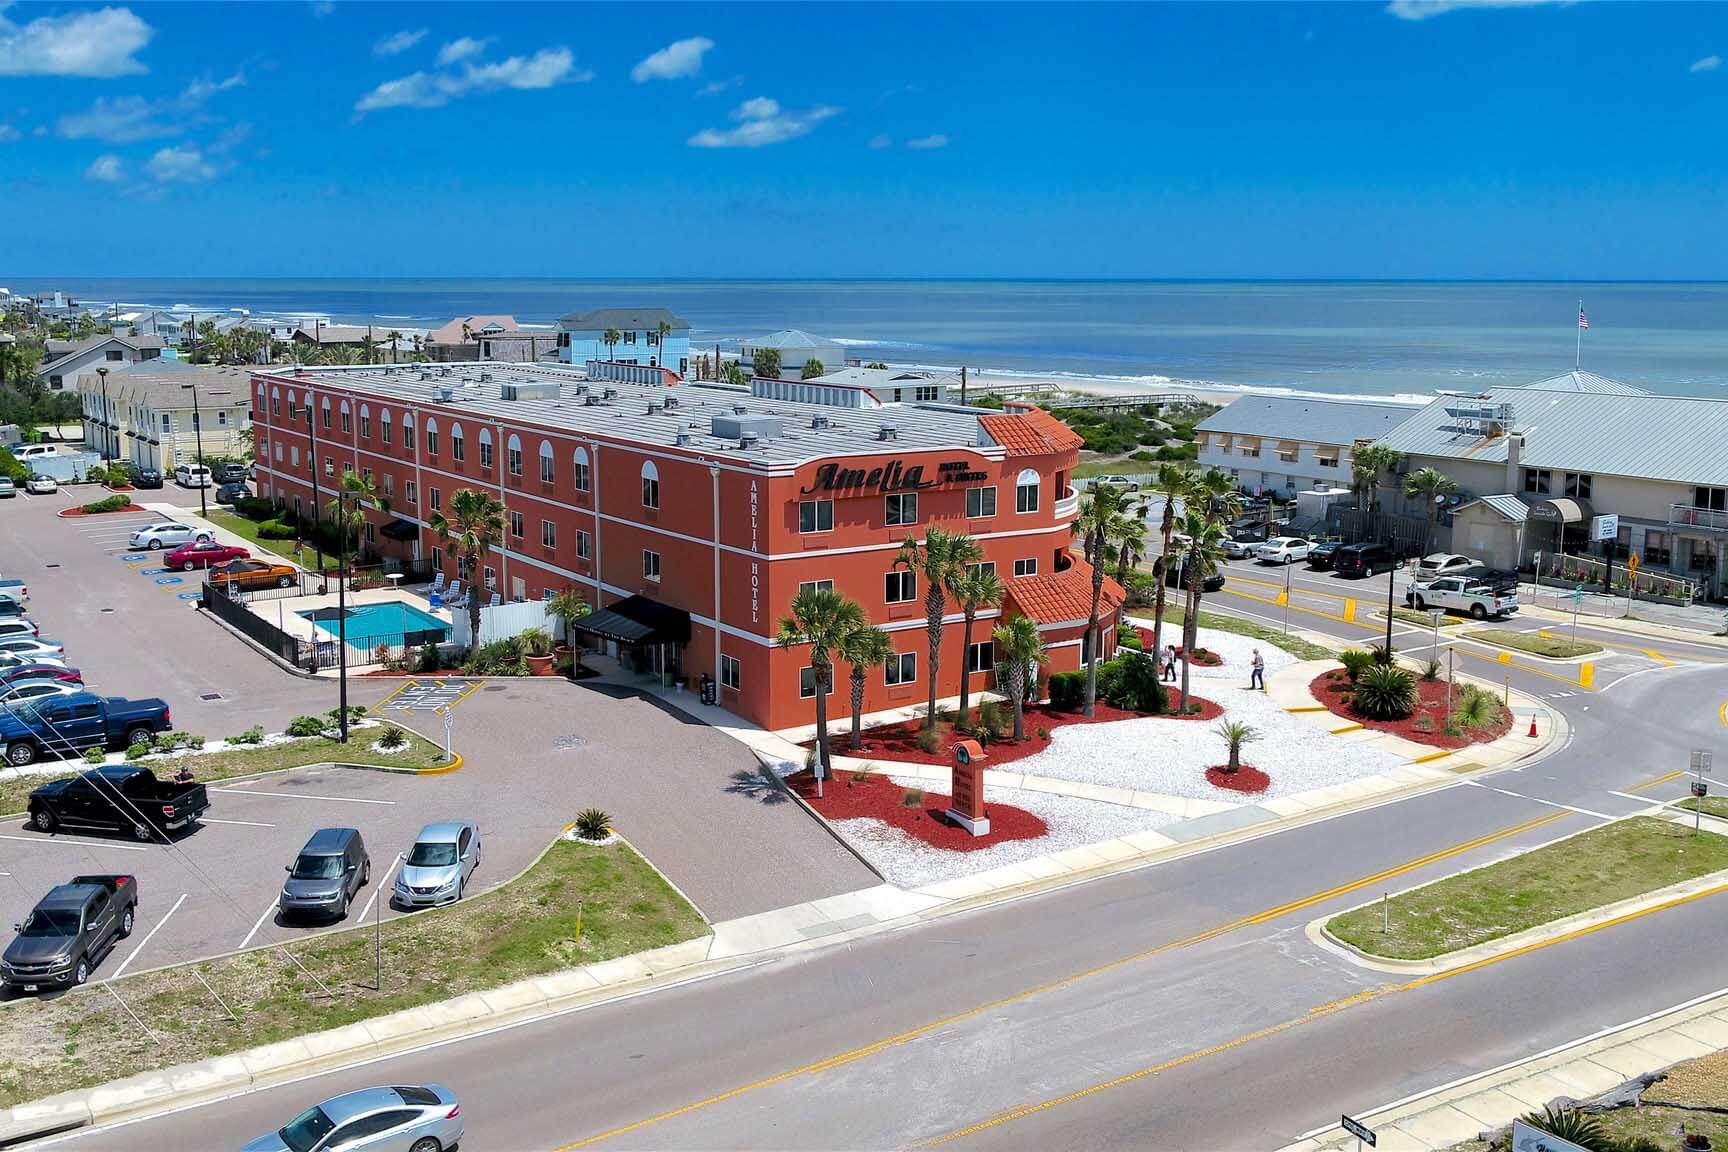 Aerial View of Amelia Hotel at the Beach. 